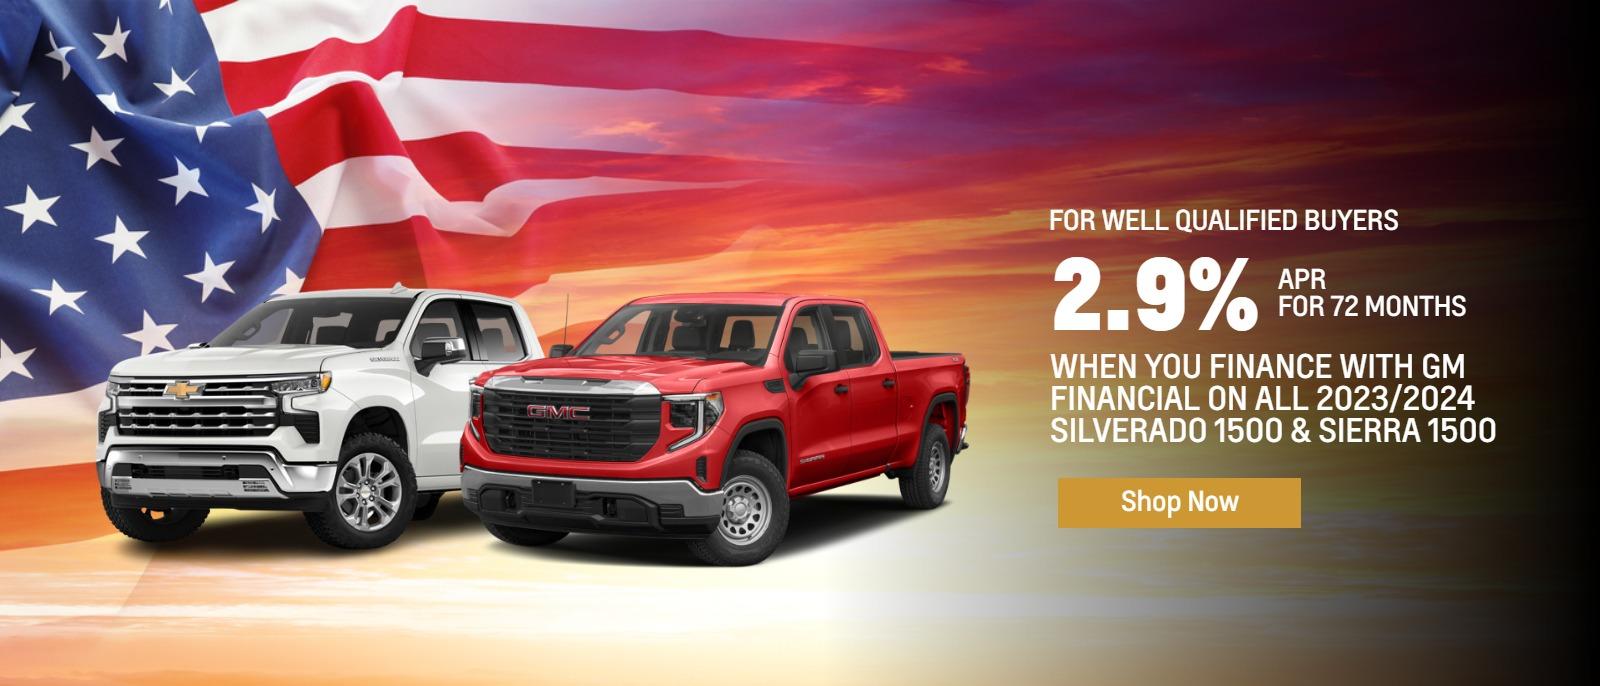 for well qualified buyers
2.9% APR for 72 months
when you finance with GM financial on all 2023/2024 Silverado 1500 & Sierra 1500